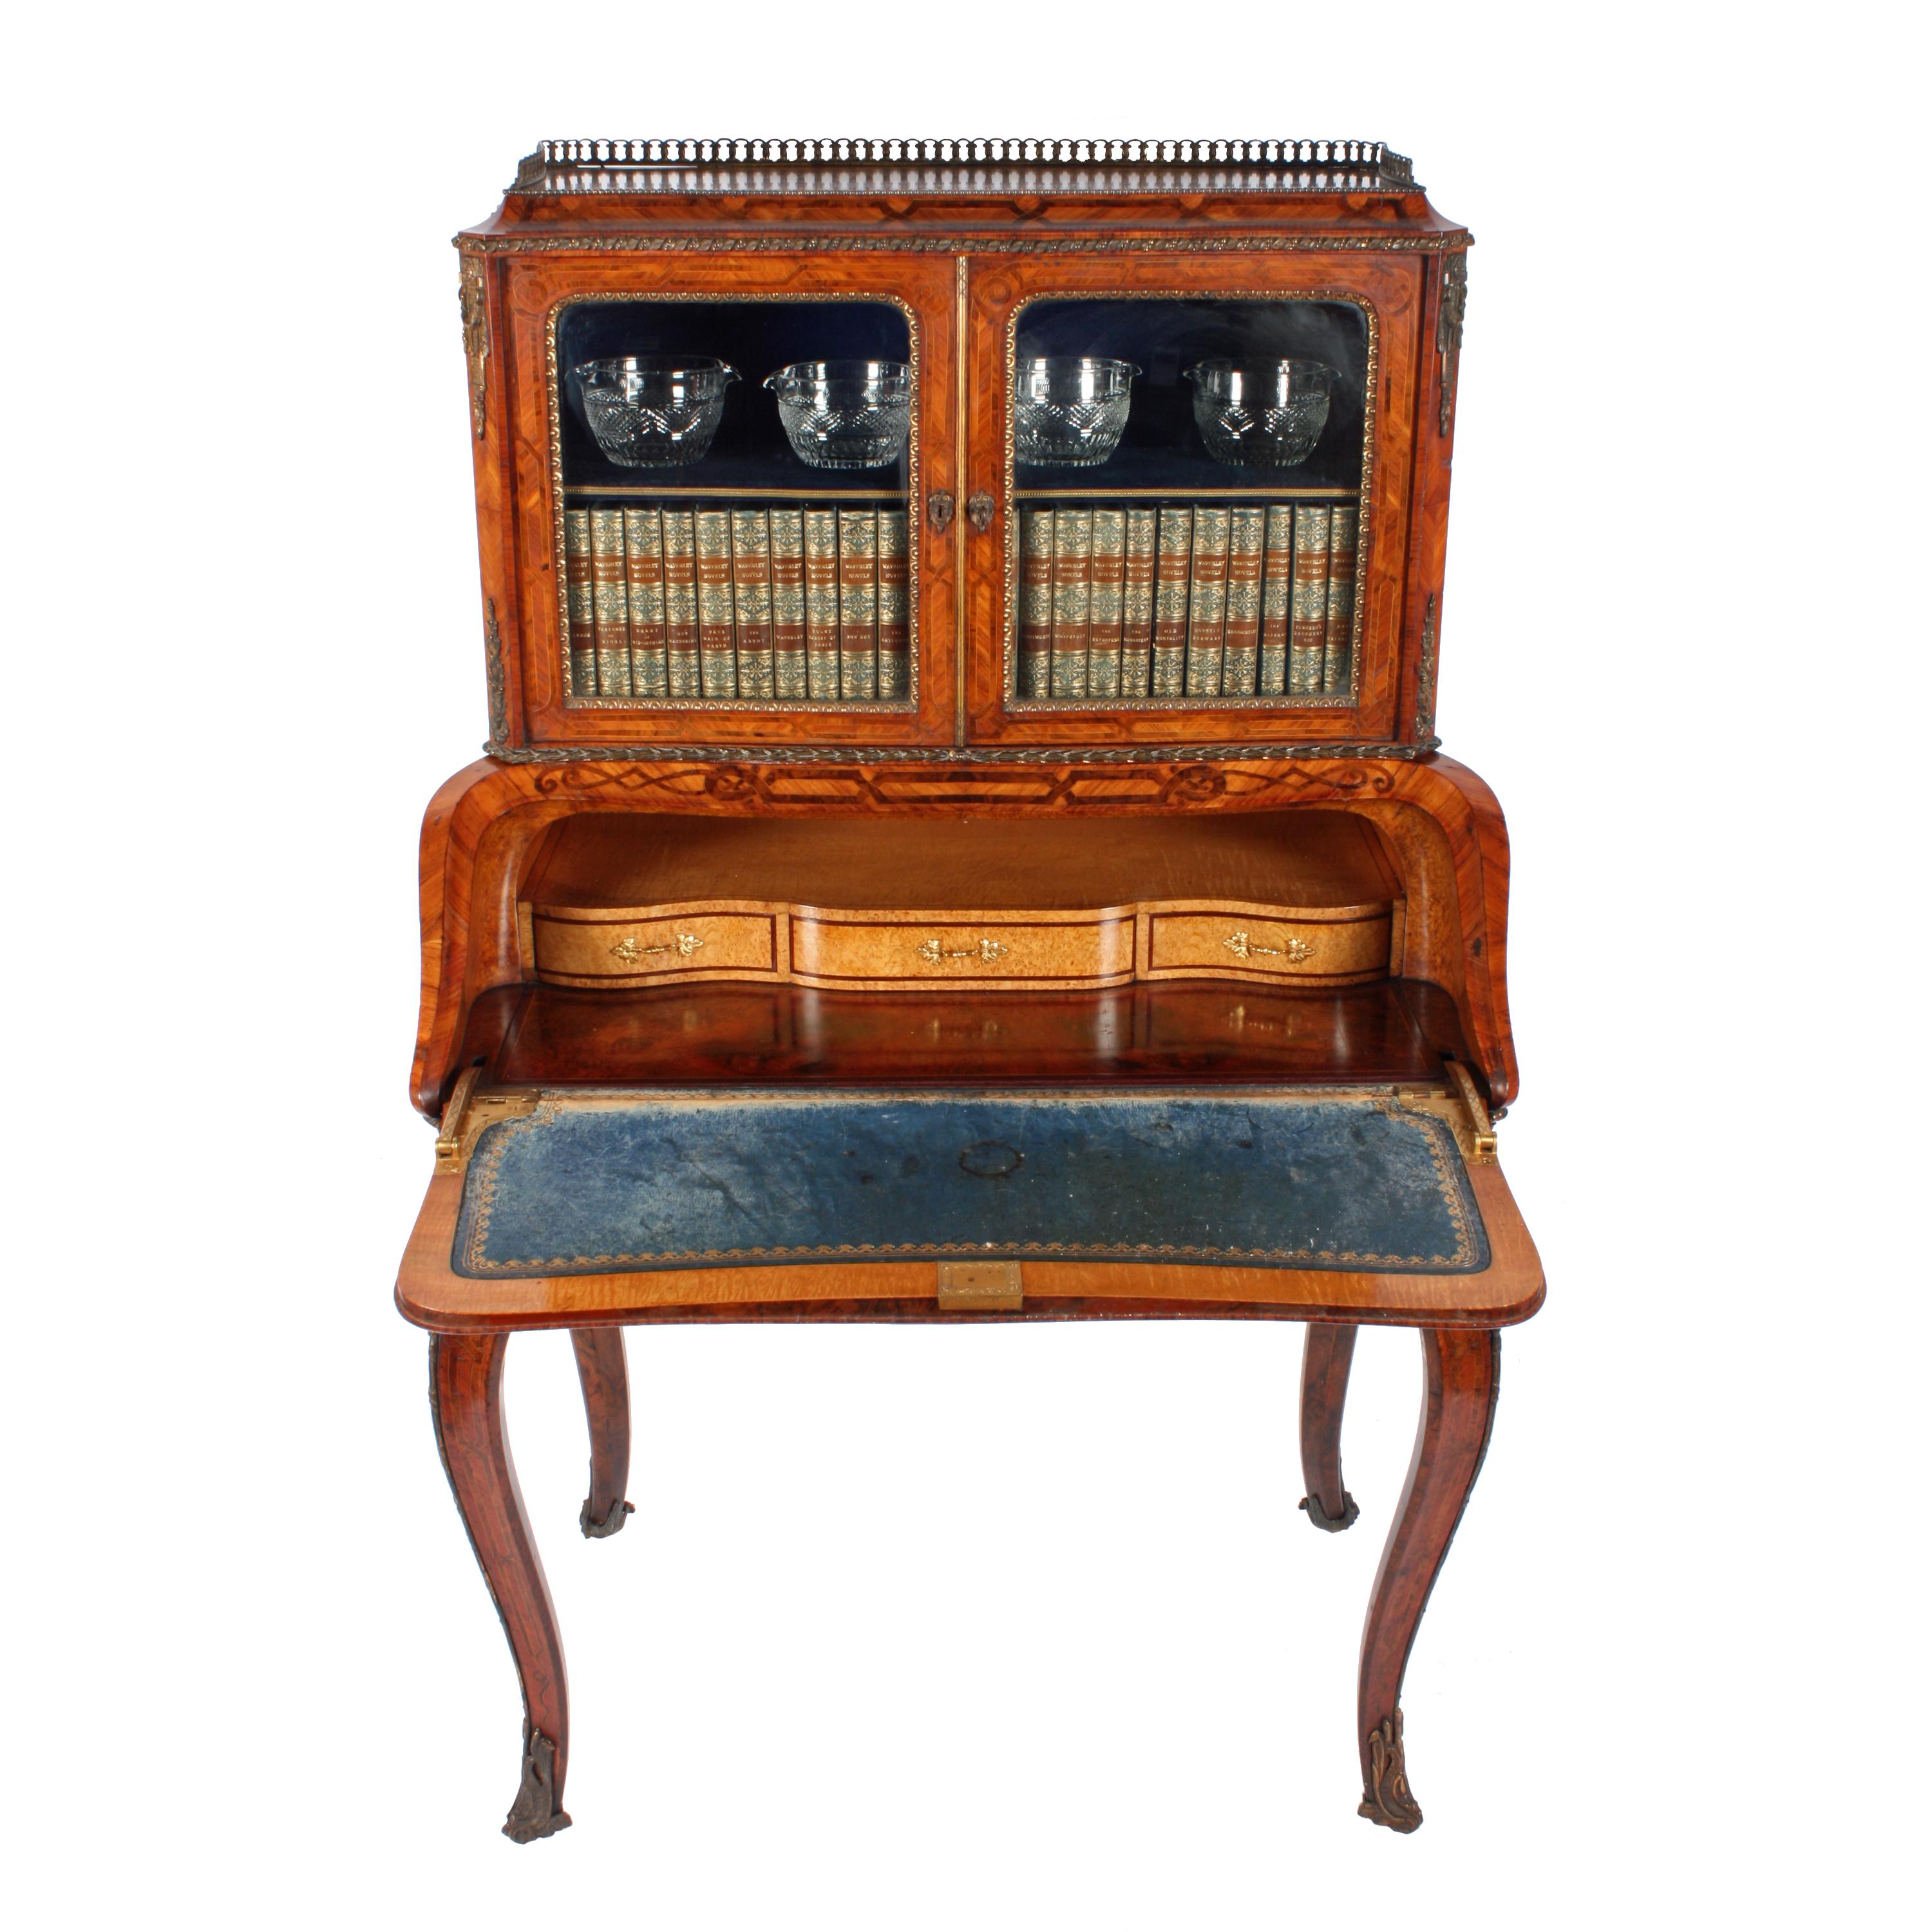 A 19th century Victorian bombé shaped bureau with a cabinet top.

The bureau is quarter veneered in kingwood and is parquetry inlaid with figured walnut.

The bureau has gilt metal mounts and stands on four cabriole shaped legs.

The shaped